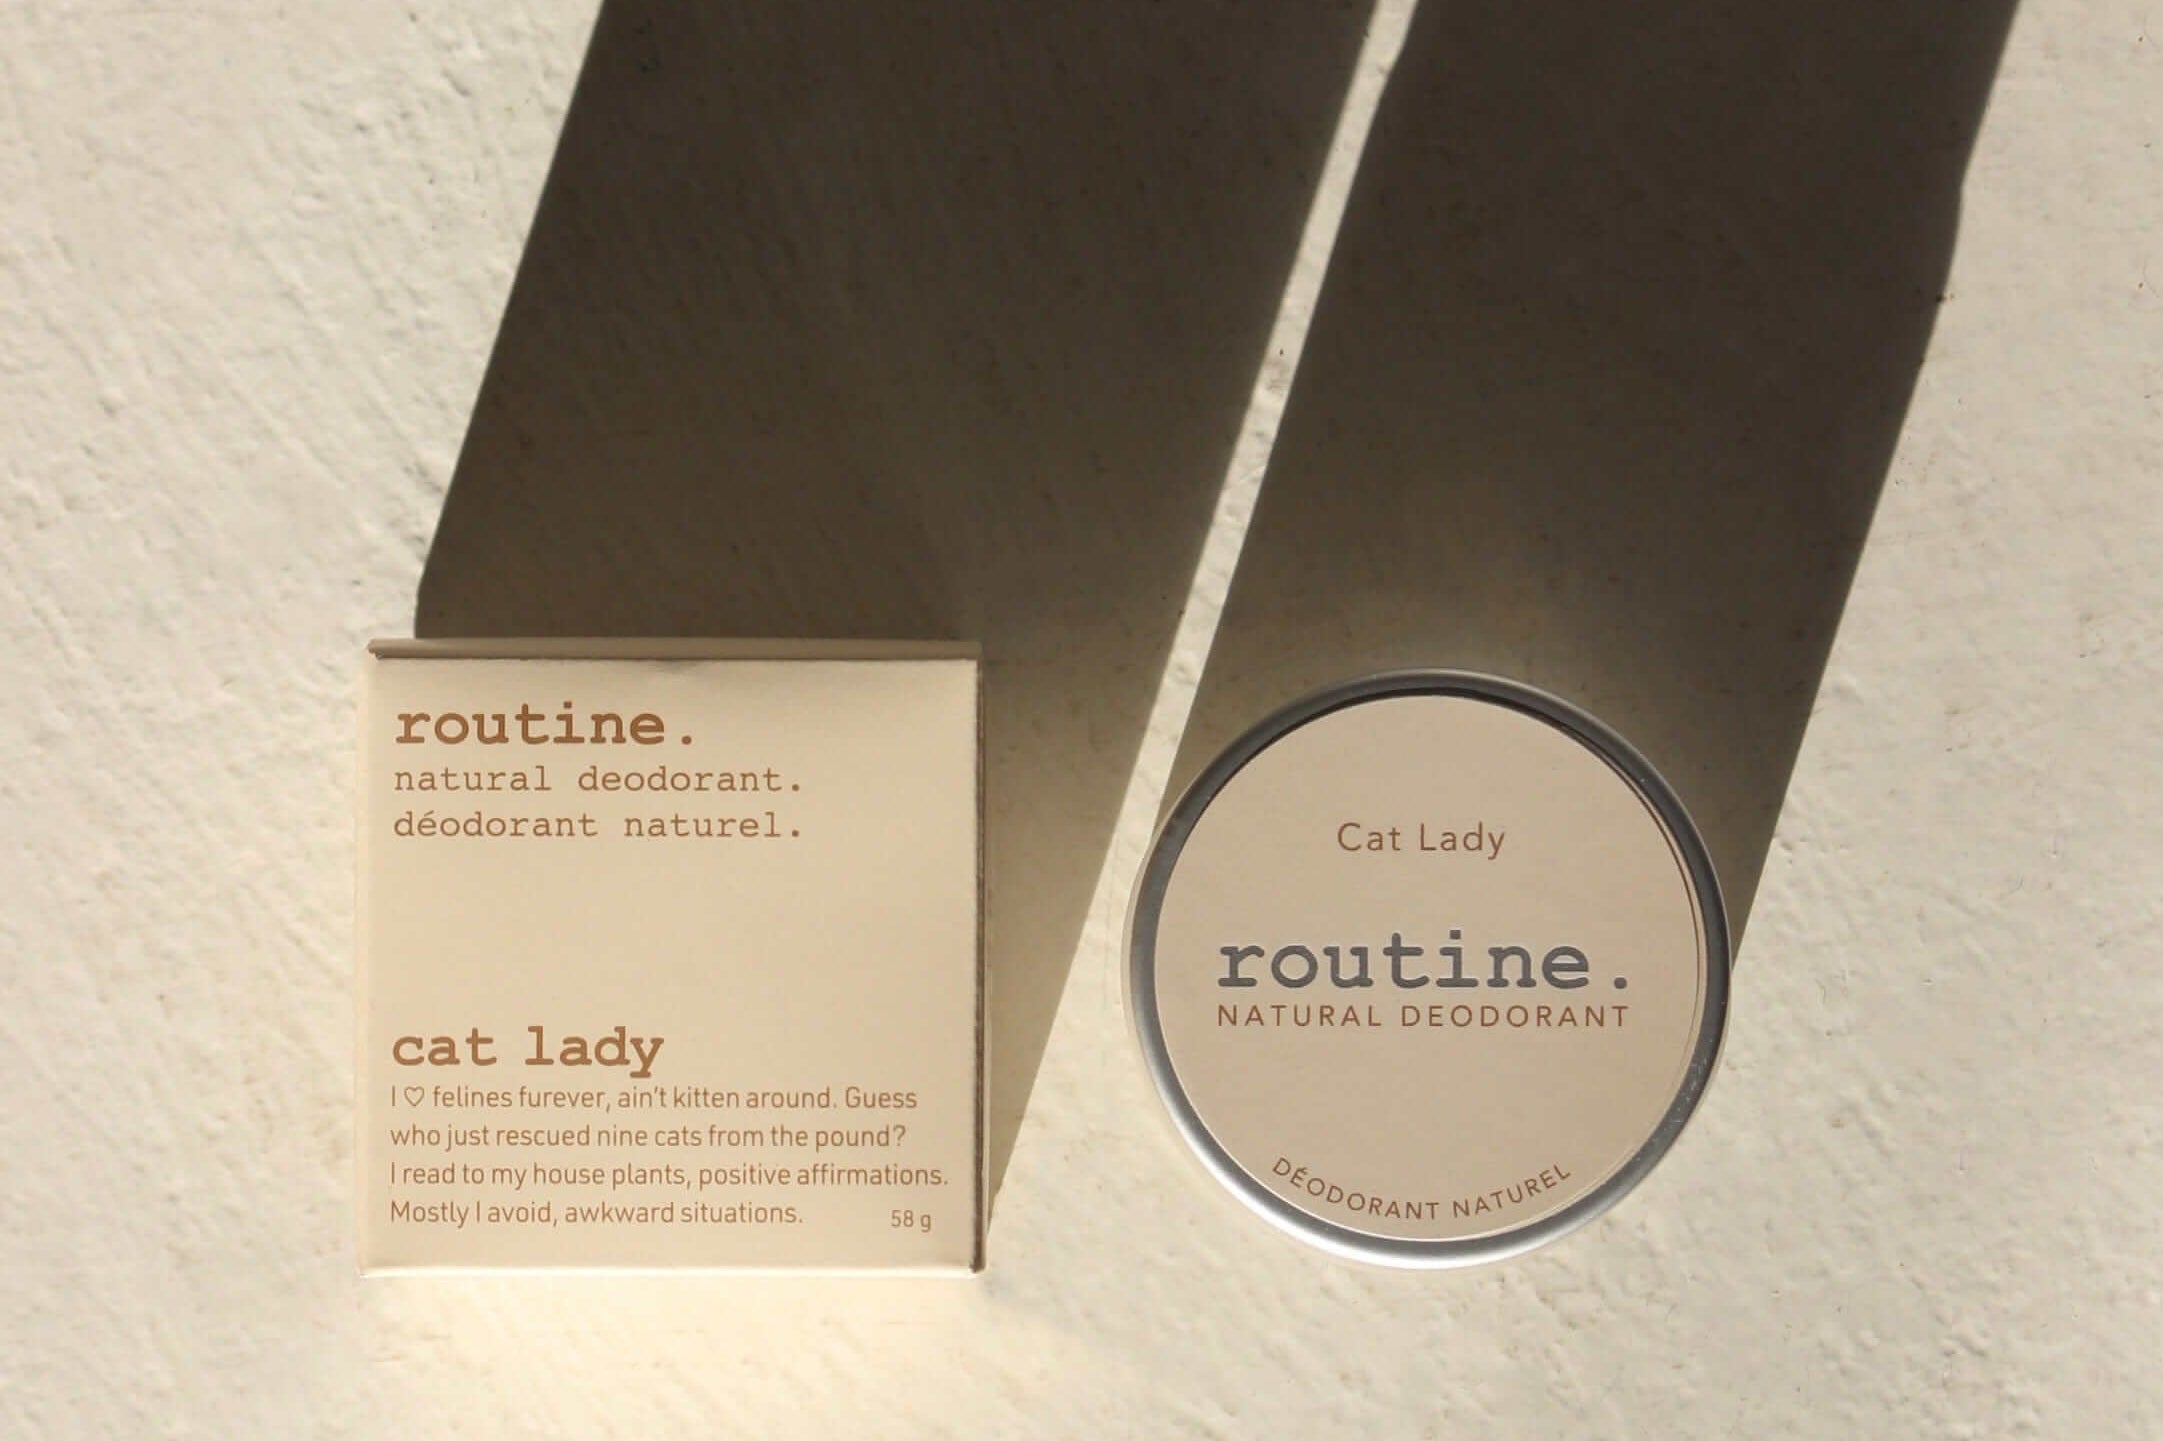 Routine Deodorant Routine, Deodorant Cat Lady sweet and fruity, made in Calgary